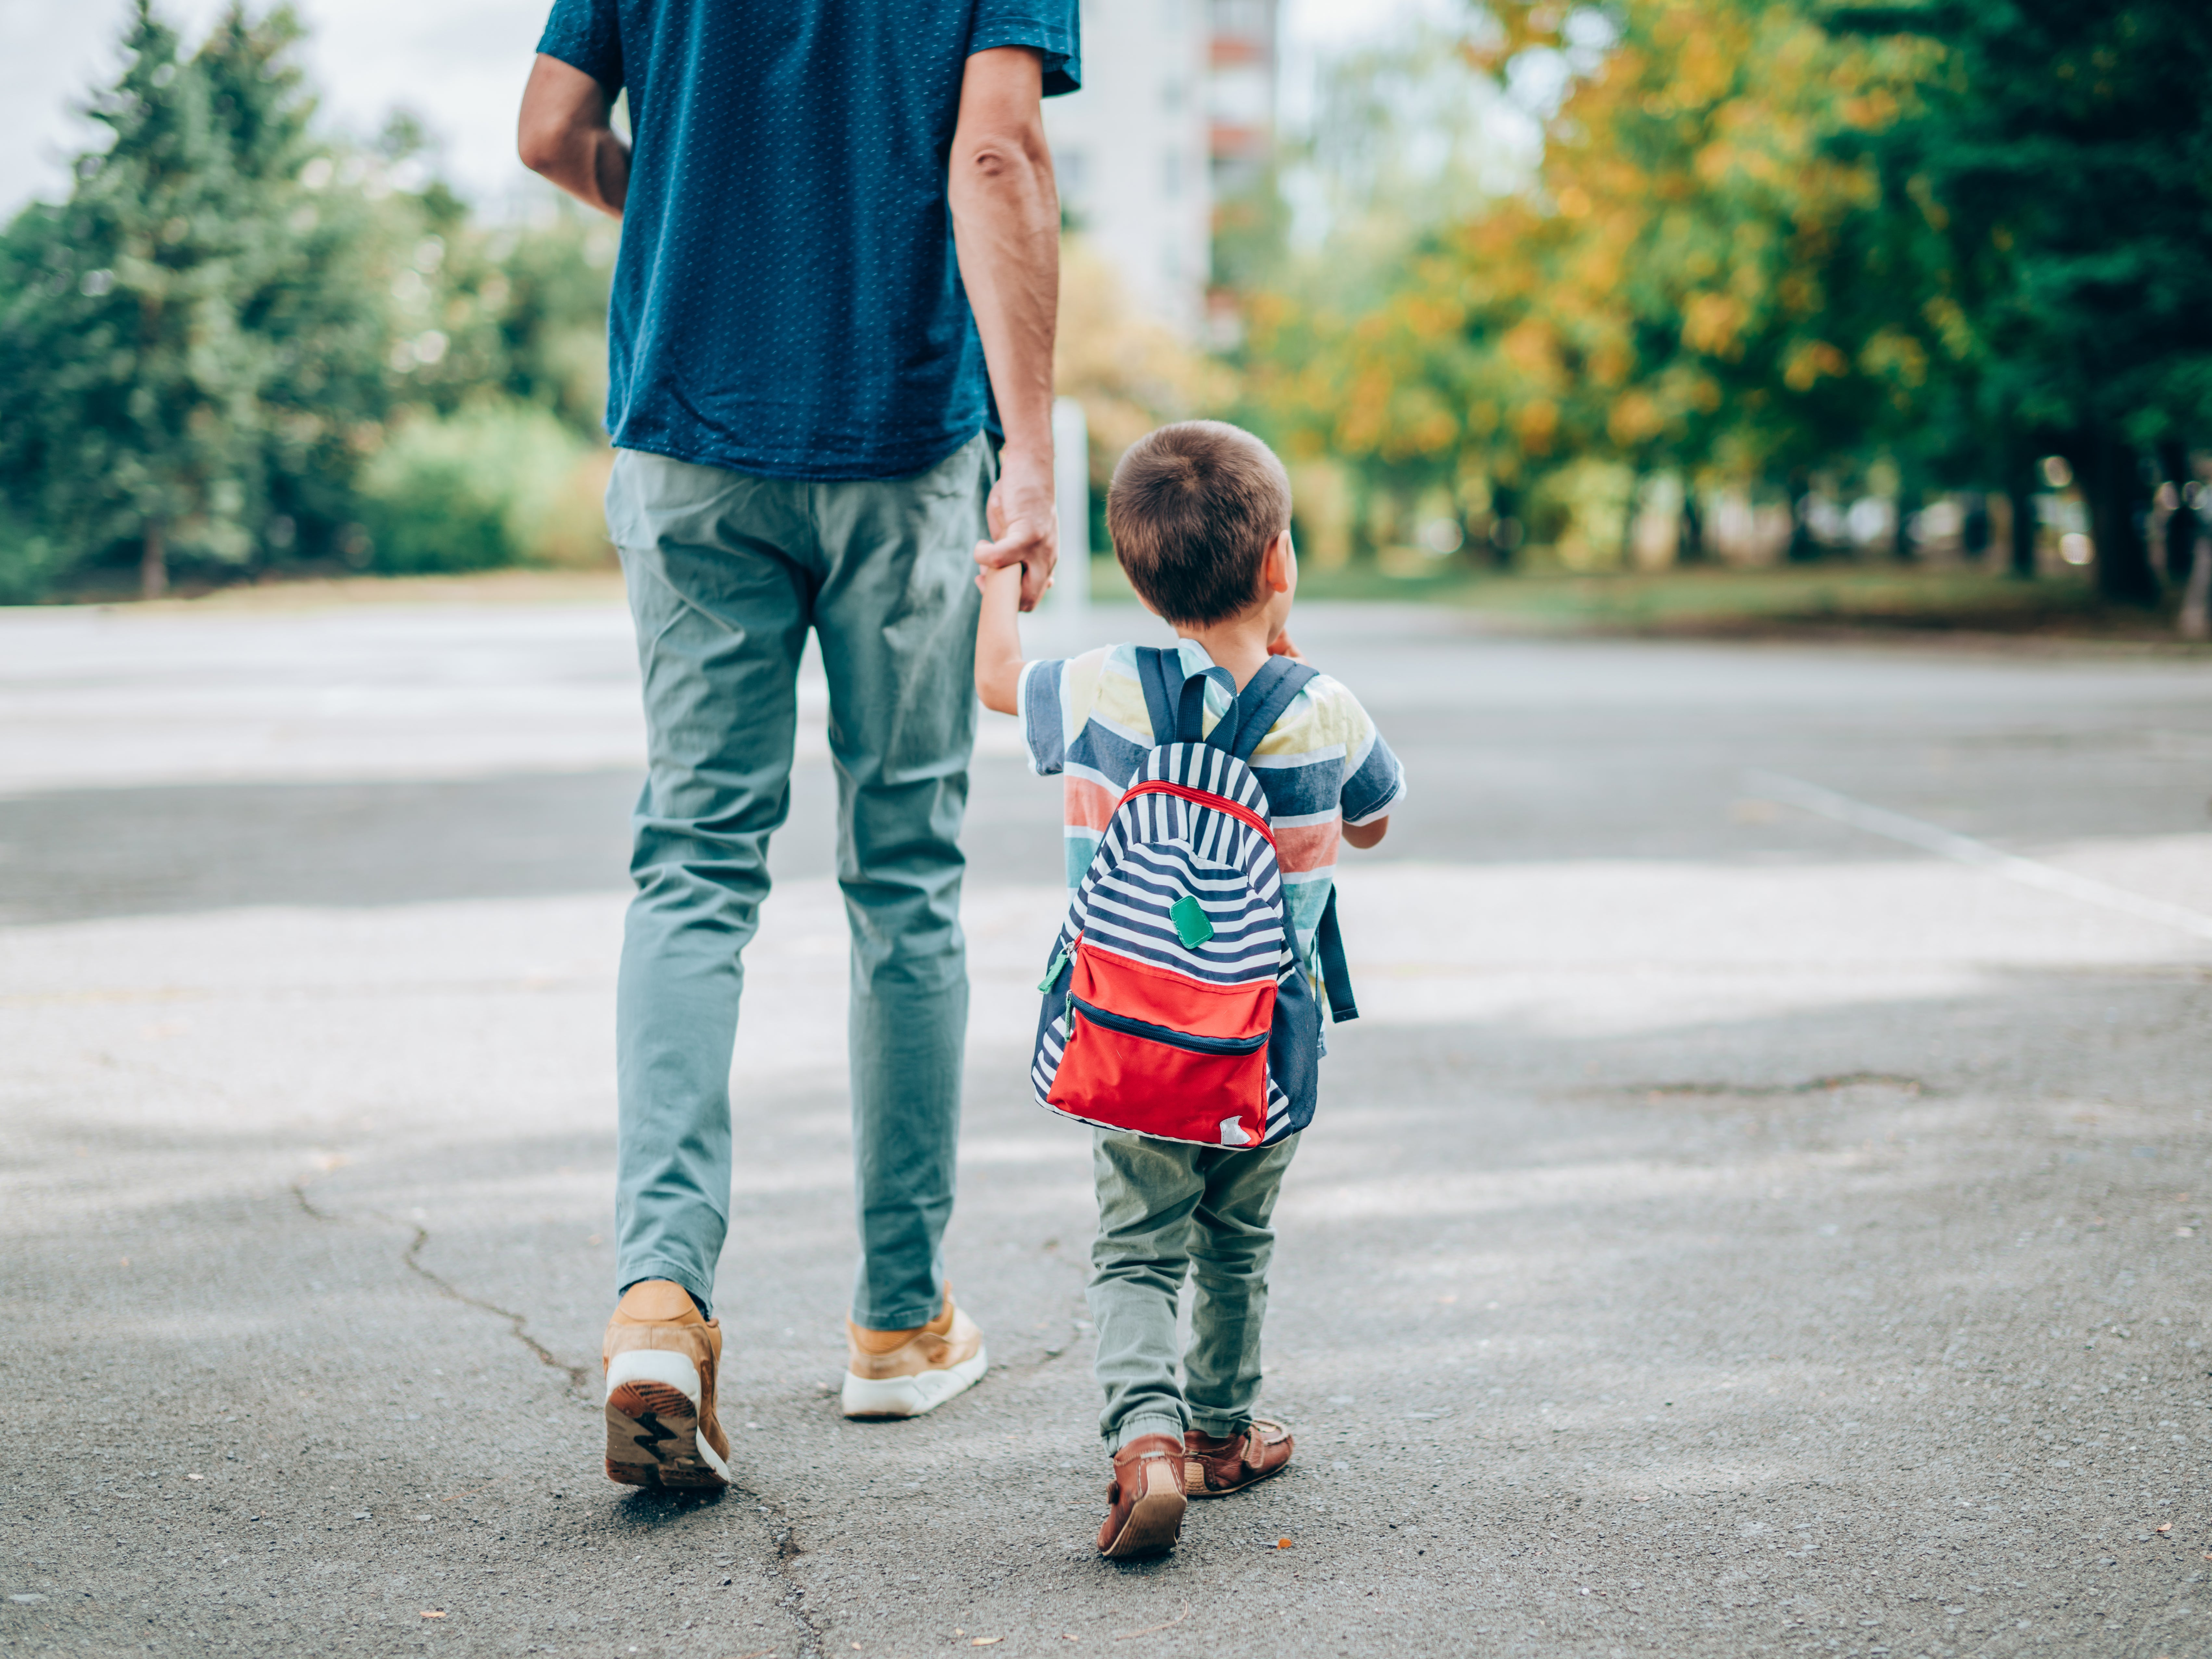 Legislation needs to catch up with the changing roles of fathers